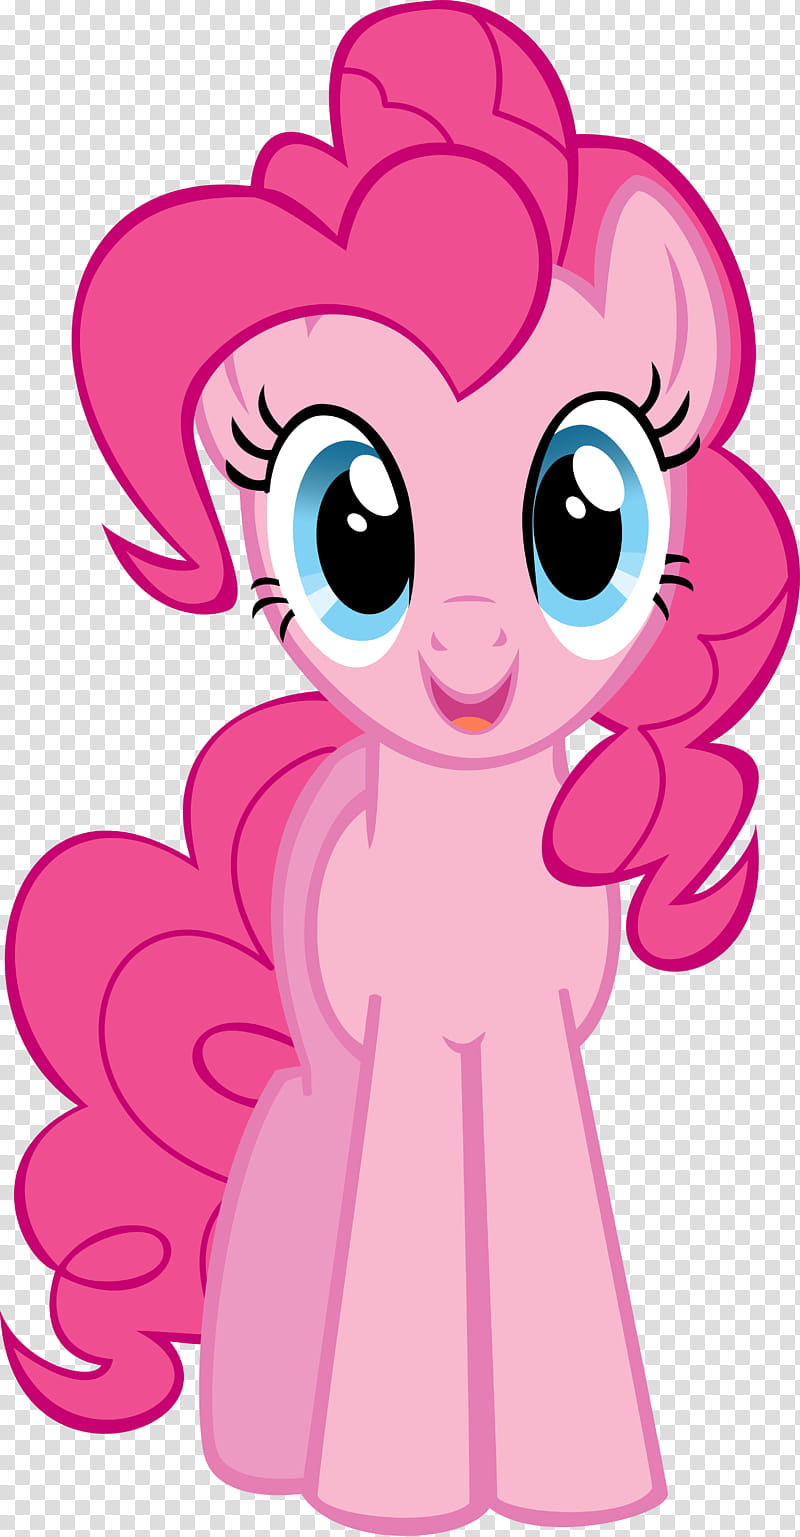 Pinkie Pie Hugs, pink My Little Pony character transparent background PNG clipart